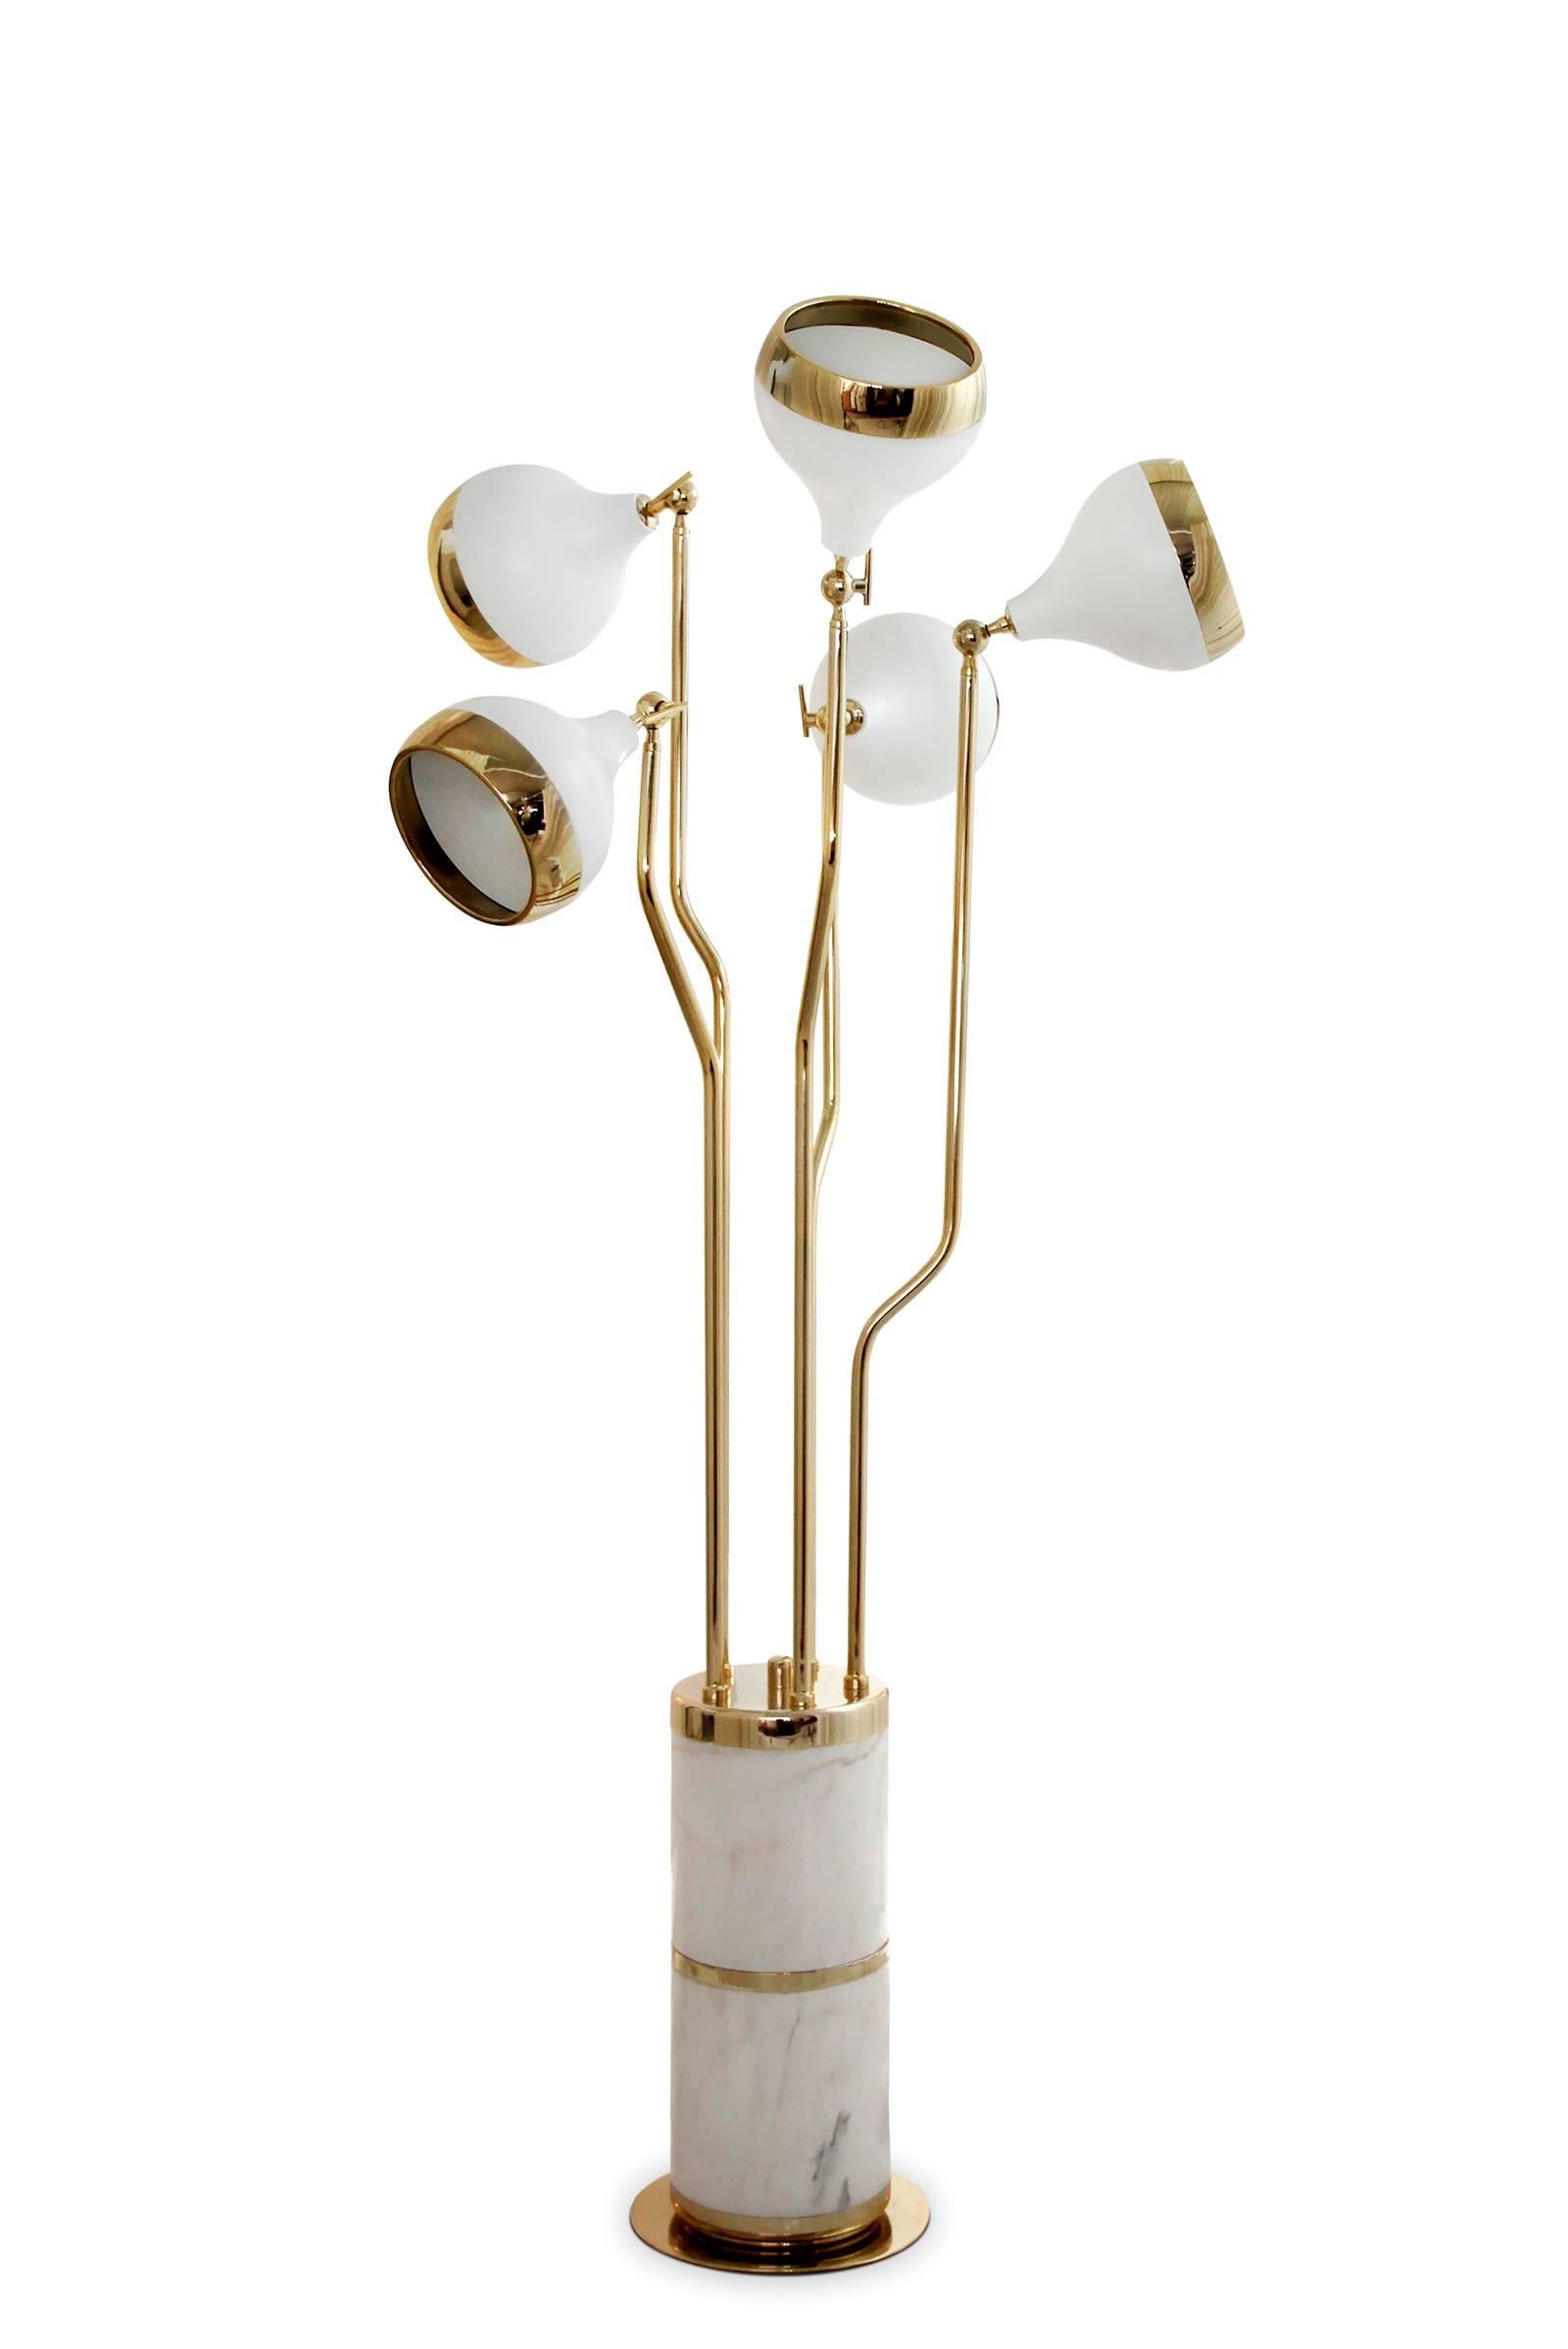 Floor lamp white lounge with brass and aluminum
with gold plated body and shades. With polished 
Estremoz marble. with 5 bubs, lamp holder type 
E27, max 40 watt. bulbs included. Weight: 34kg.
